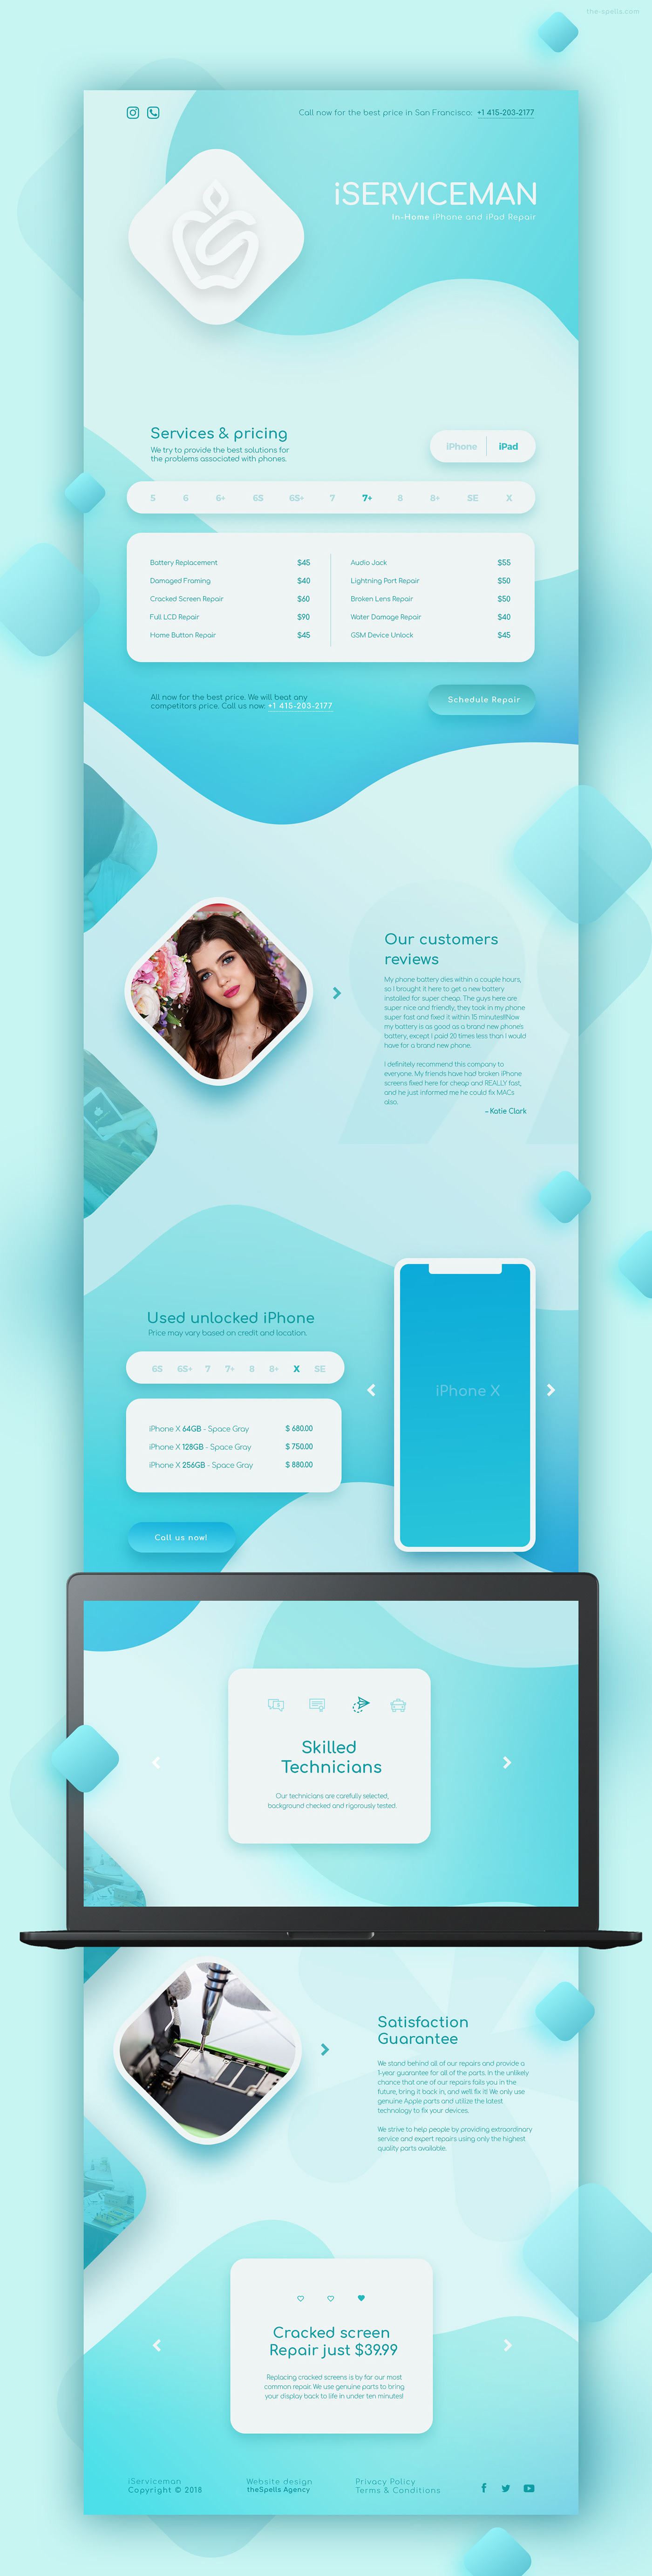 Landing page design for Apple repair company by theSpells Agency